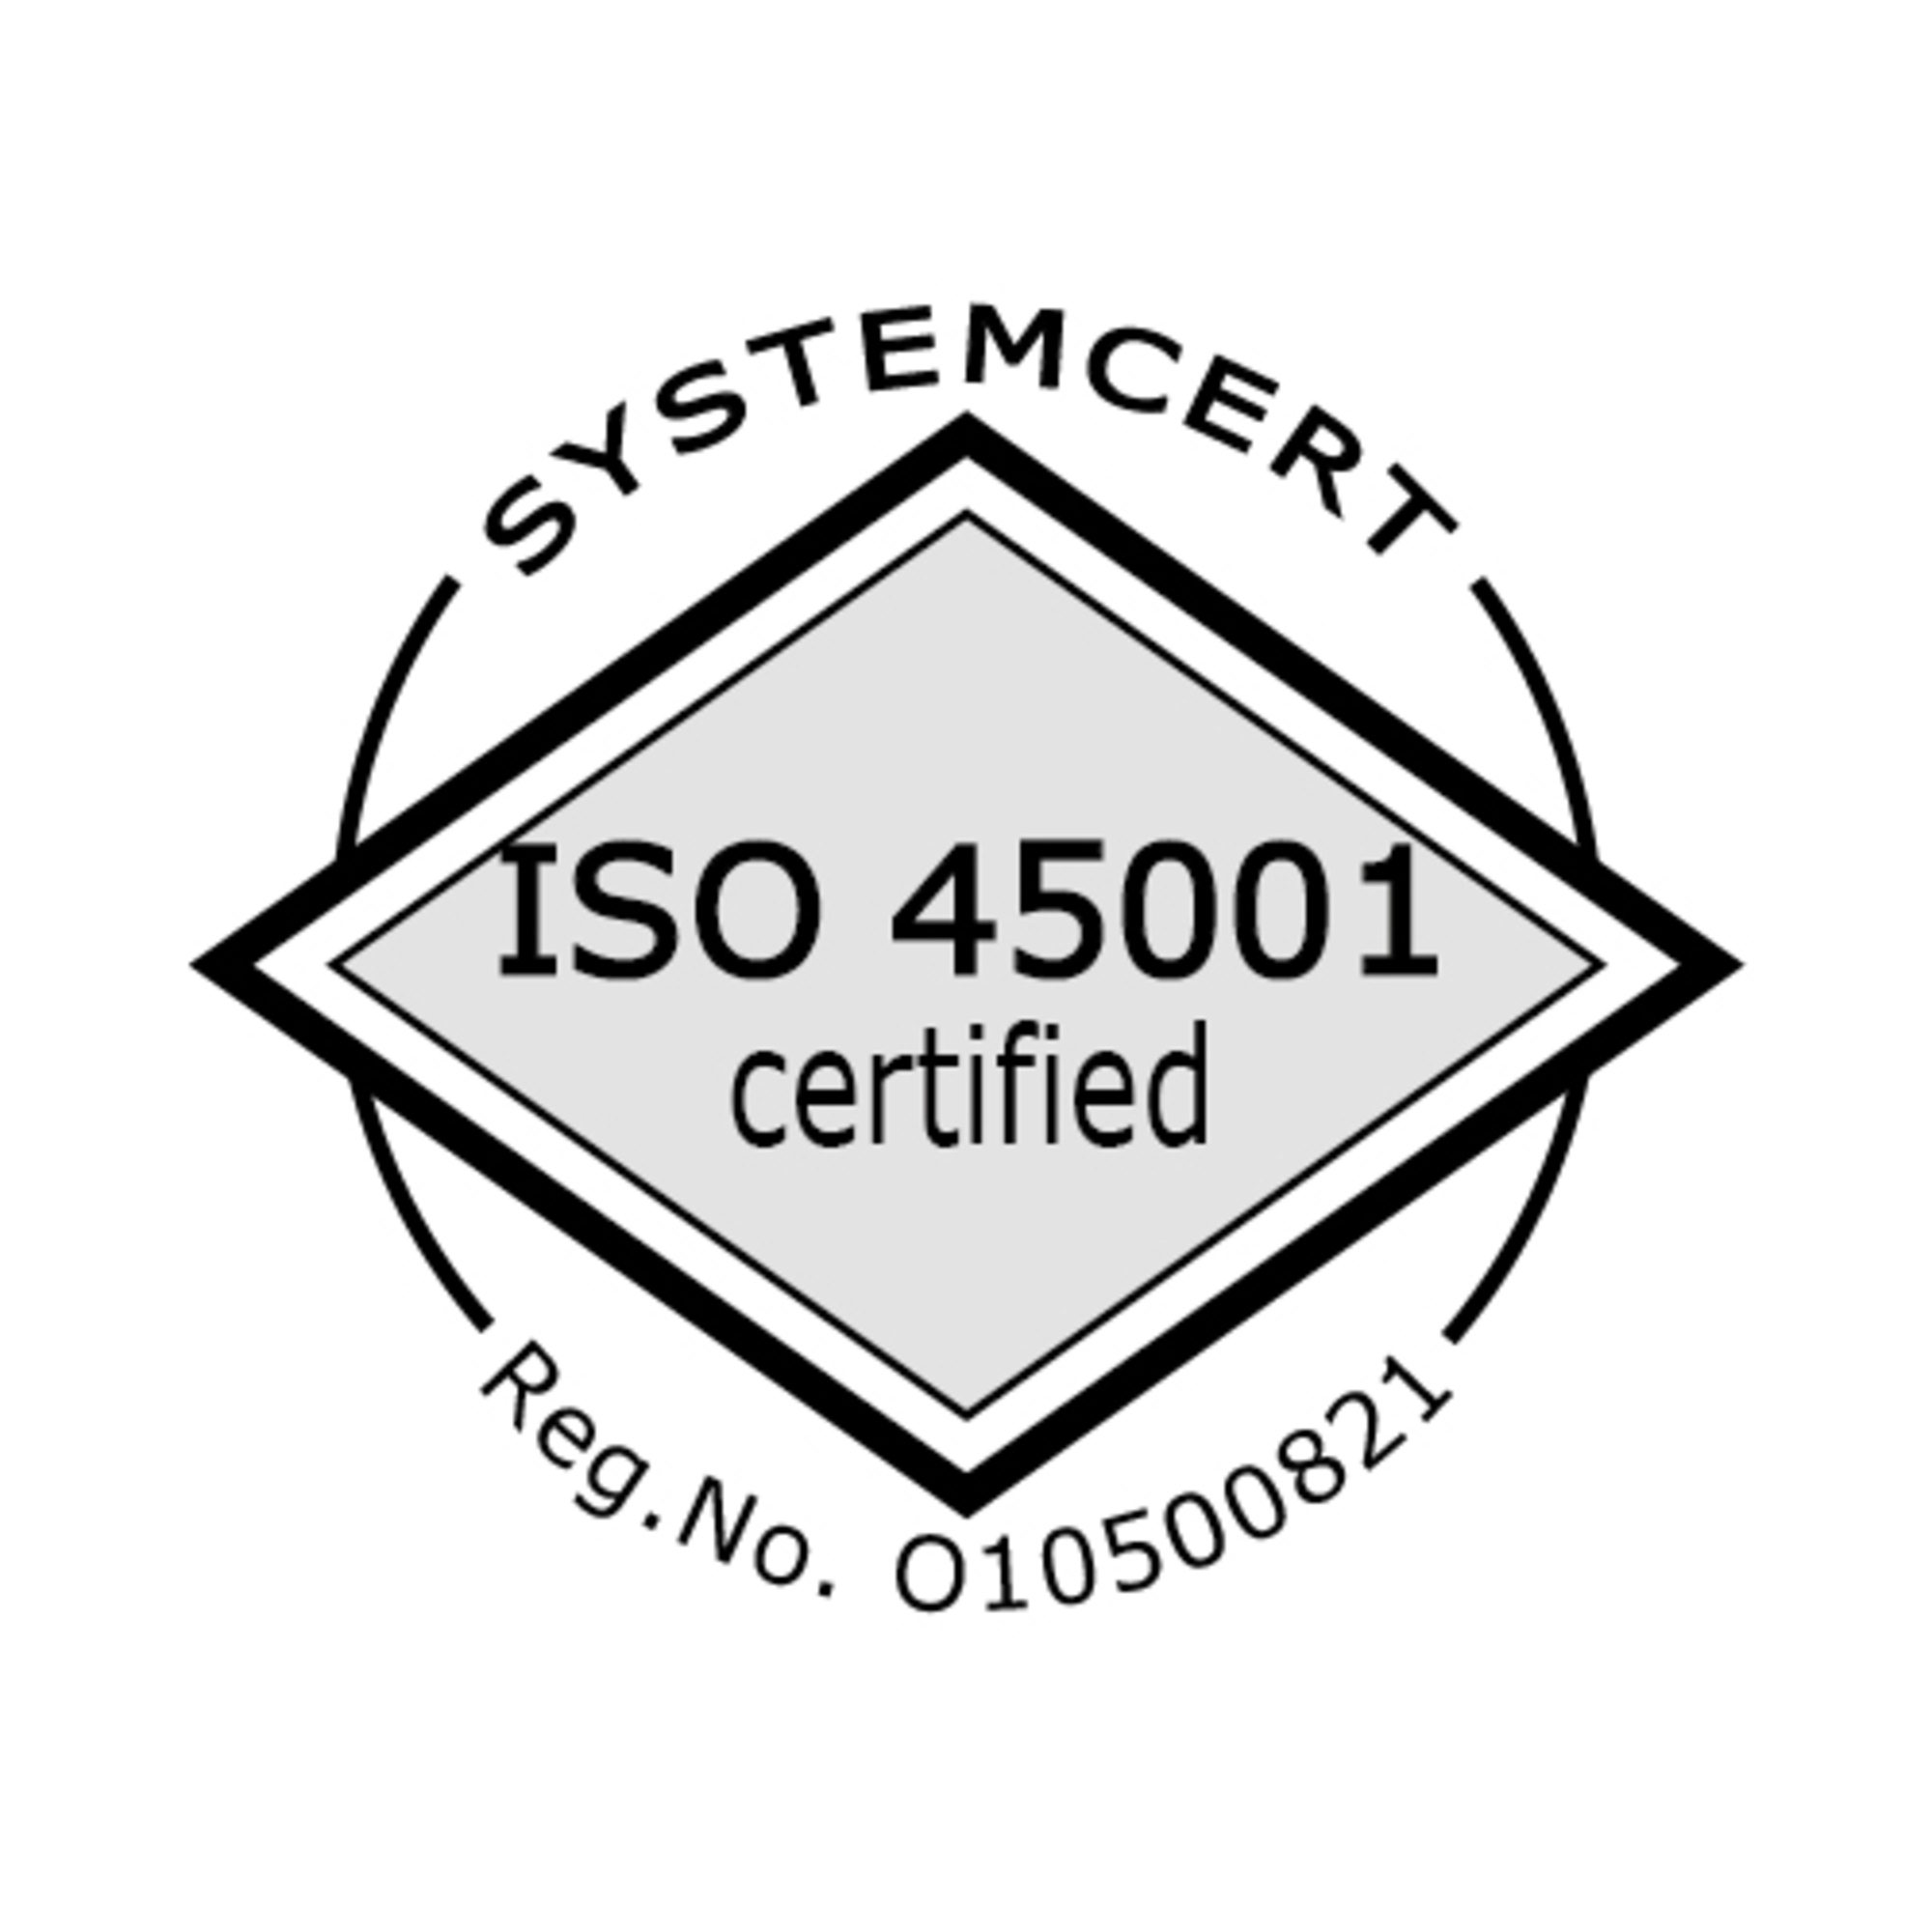 tde achieves ISO 45001:2018 certification, elevating occupational health and safety practices to new heights!